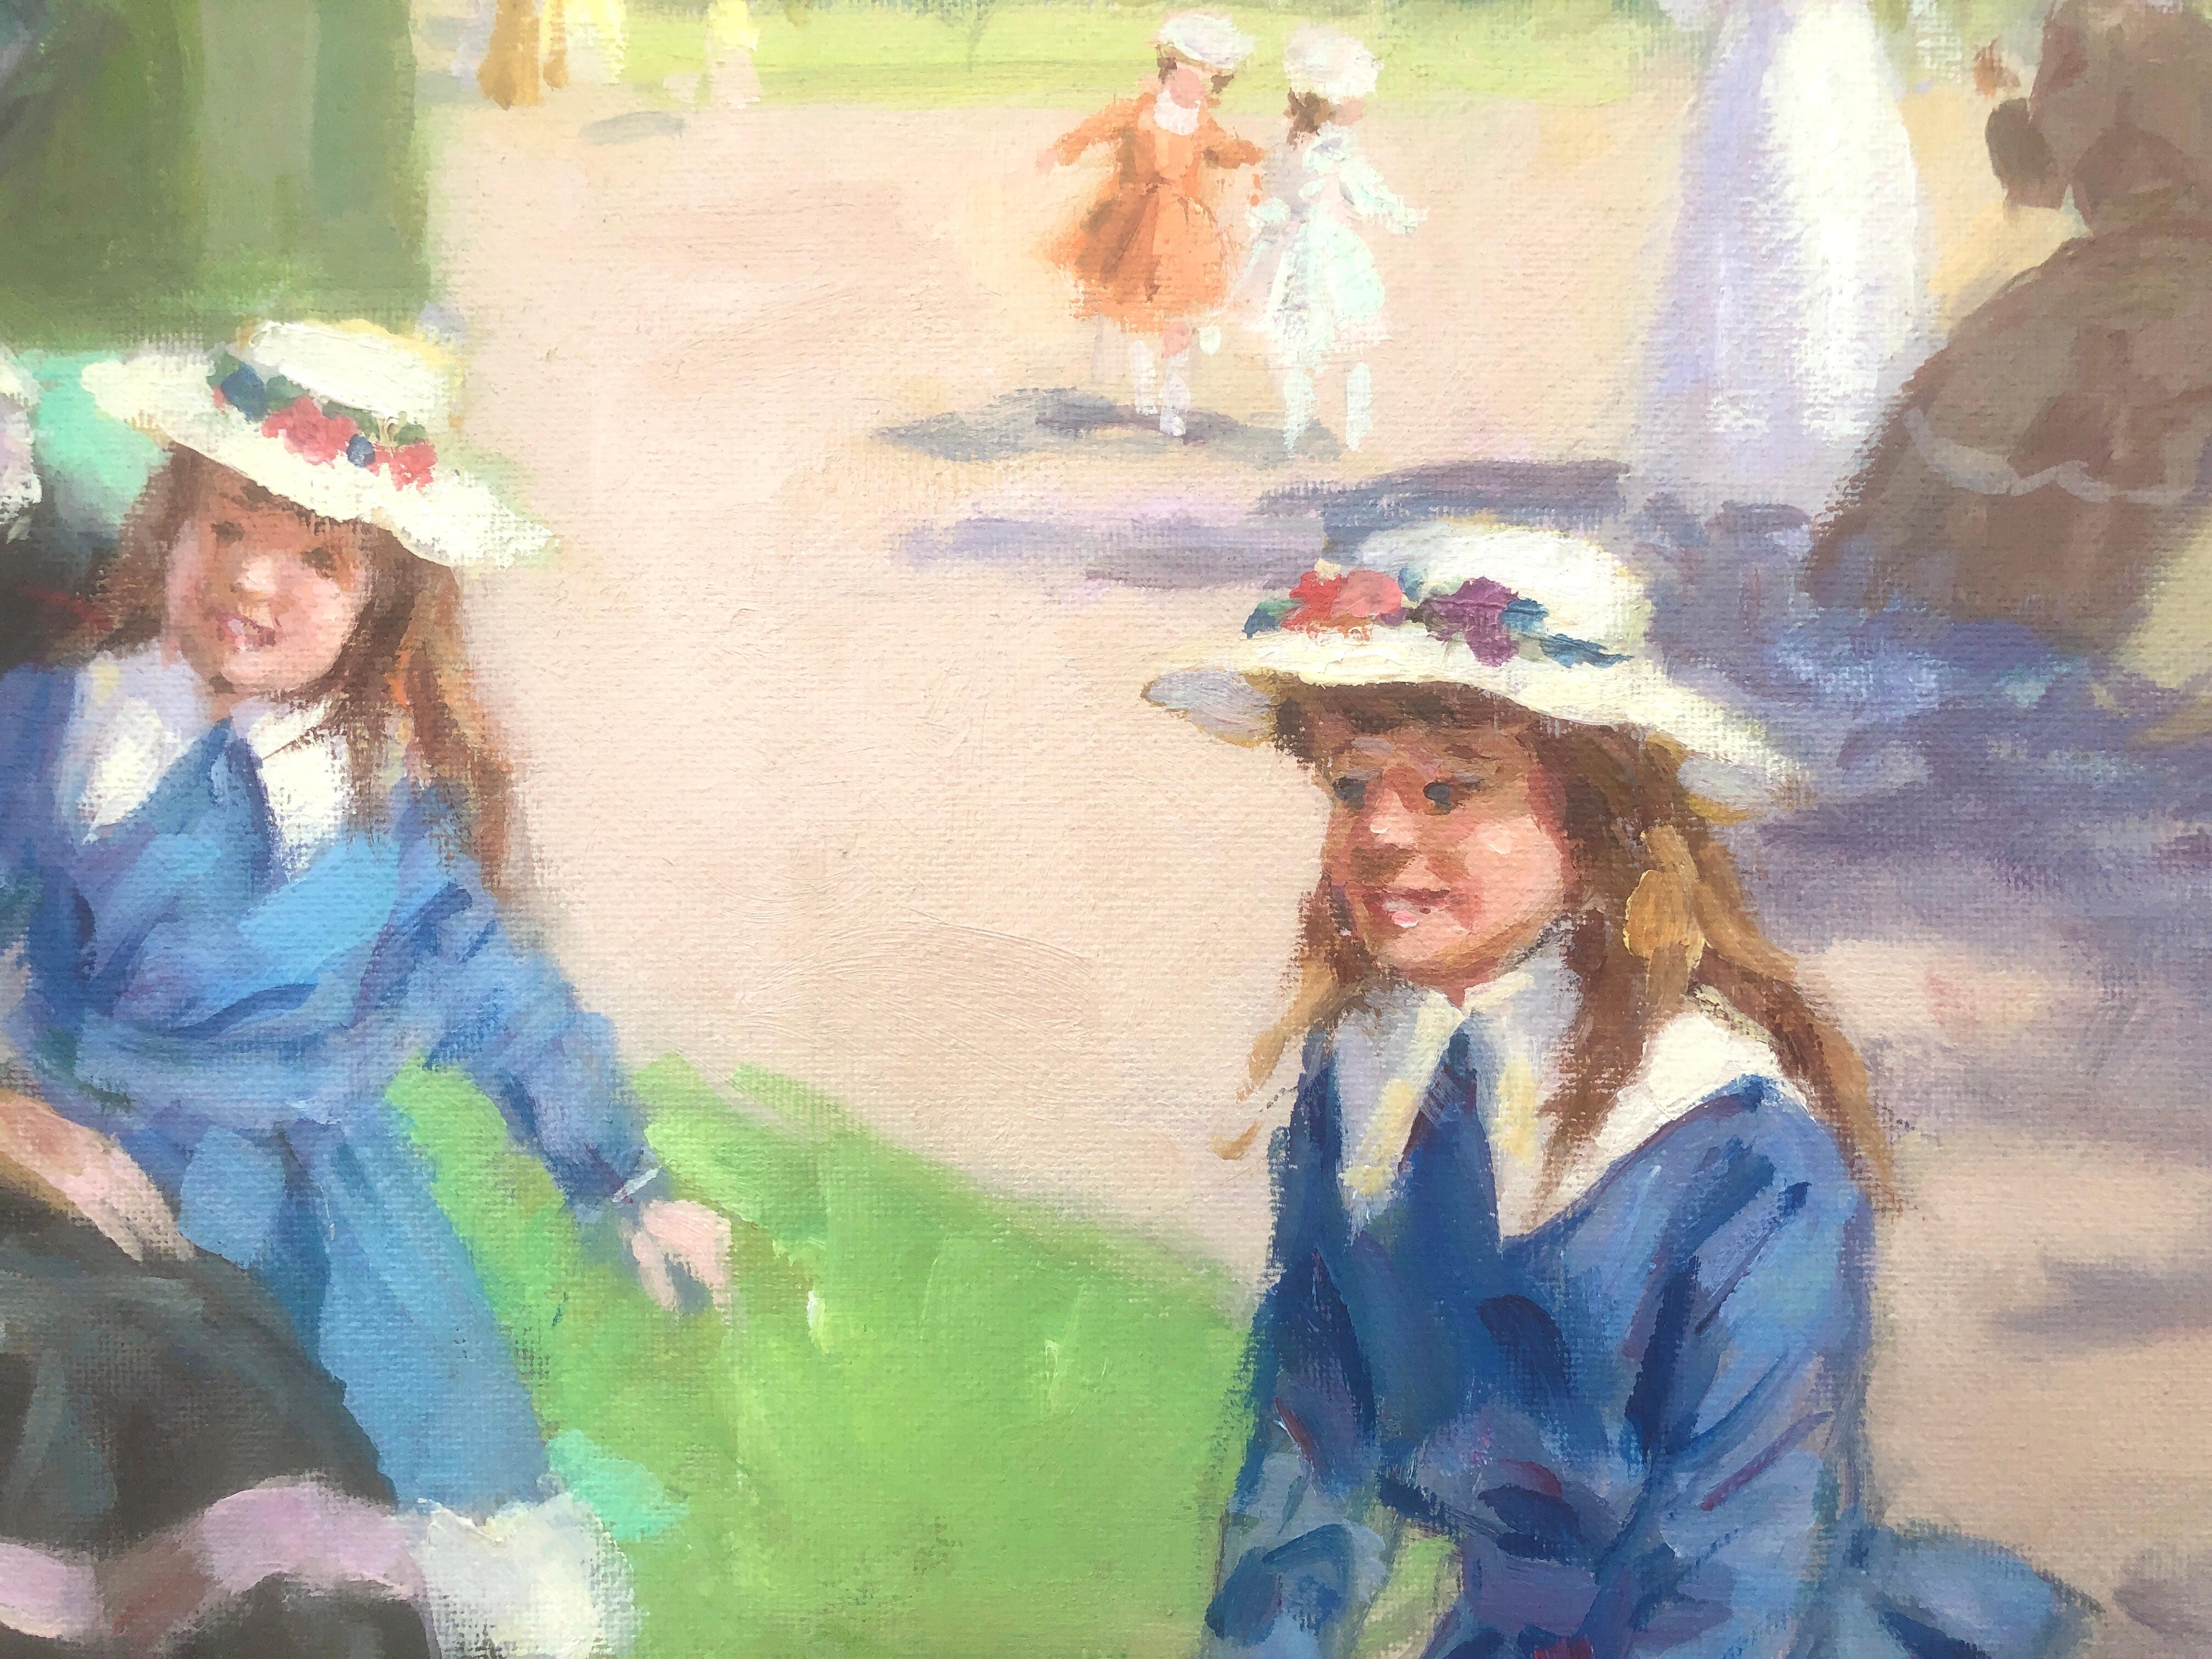 women in the park oil on canvas painting - Romantic Painting by Ramon Llampayas